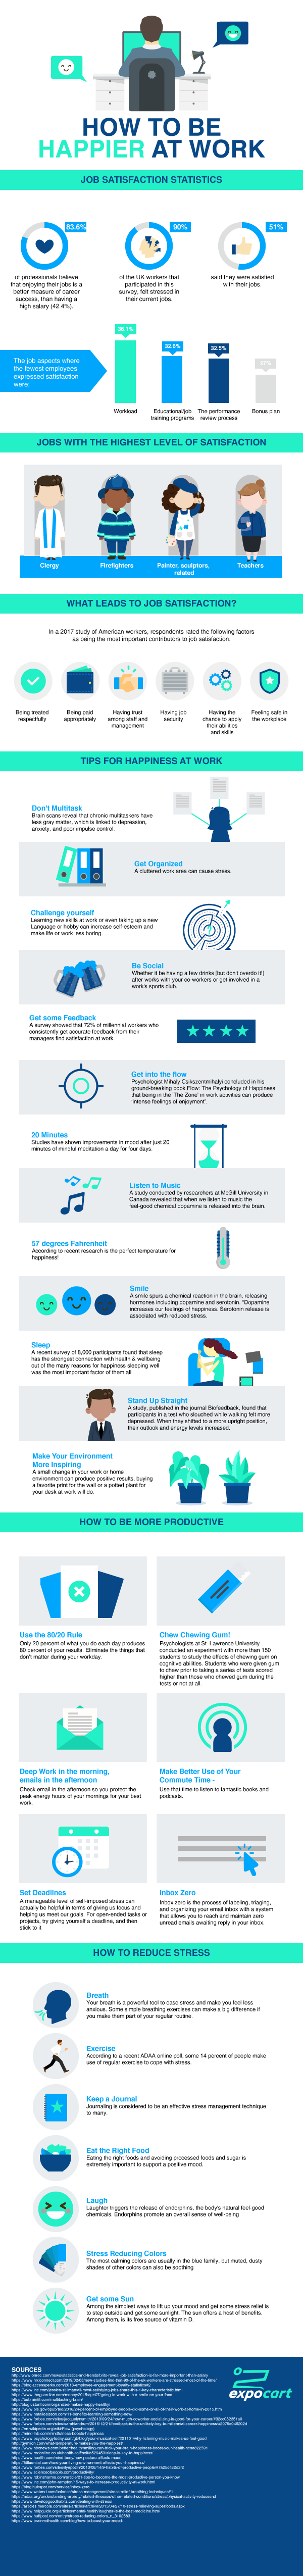 Infographic on How to be Happier at Work